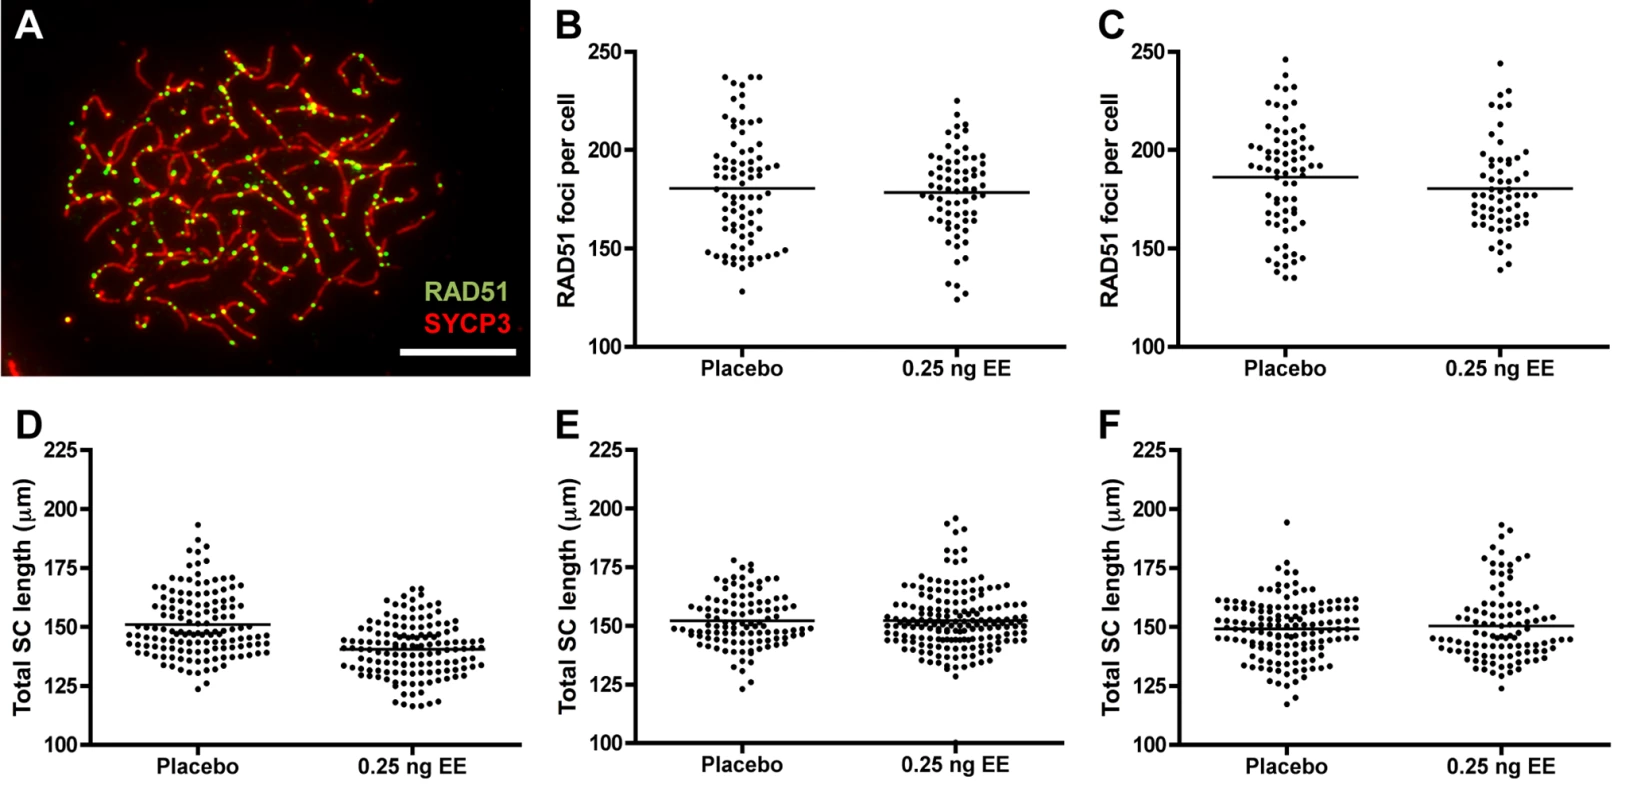 RAD51 foci counts and SC length measurements in placebo and exposed CD-1 males.